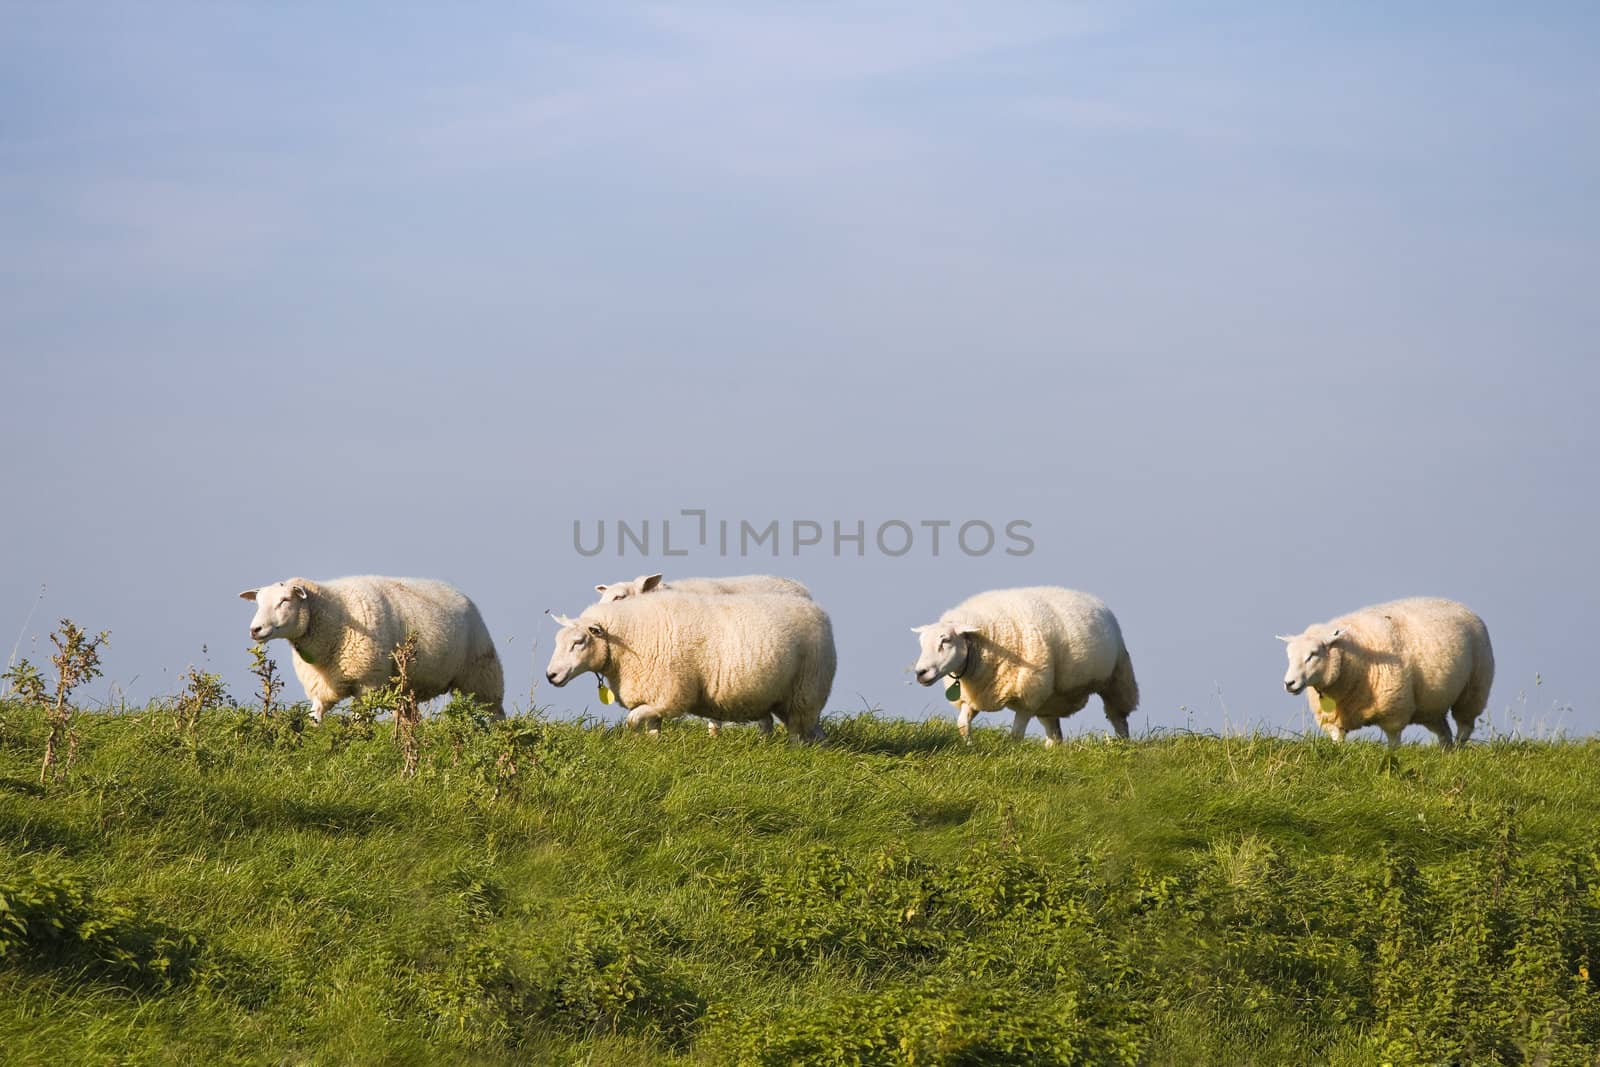 Blue sky, green grass, sheep in a row by Colette